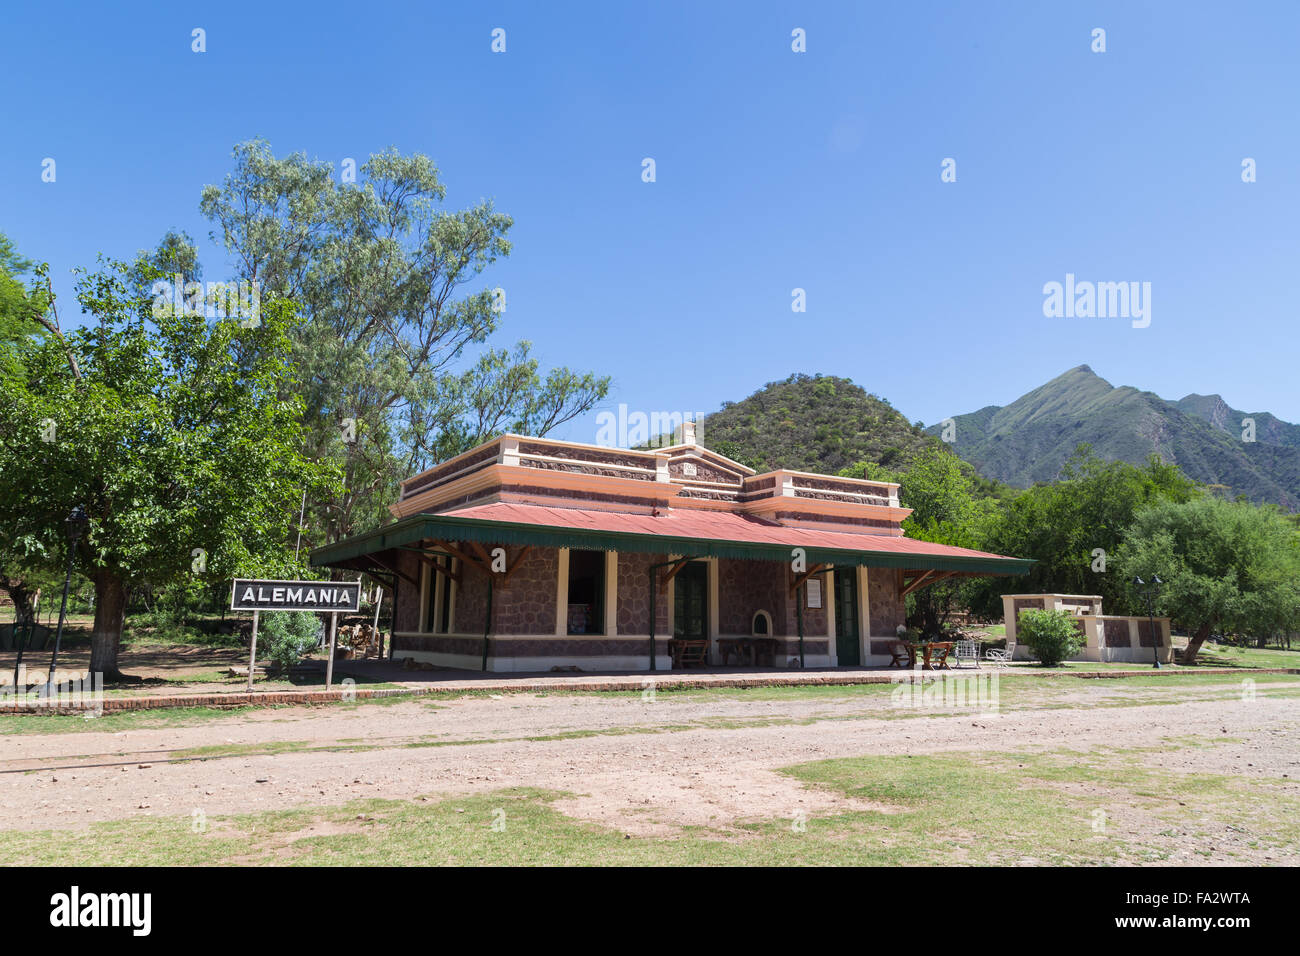 Photograph of the old train station in the village Alemania, Argentina Stock Photo